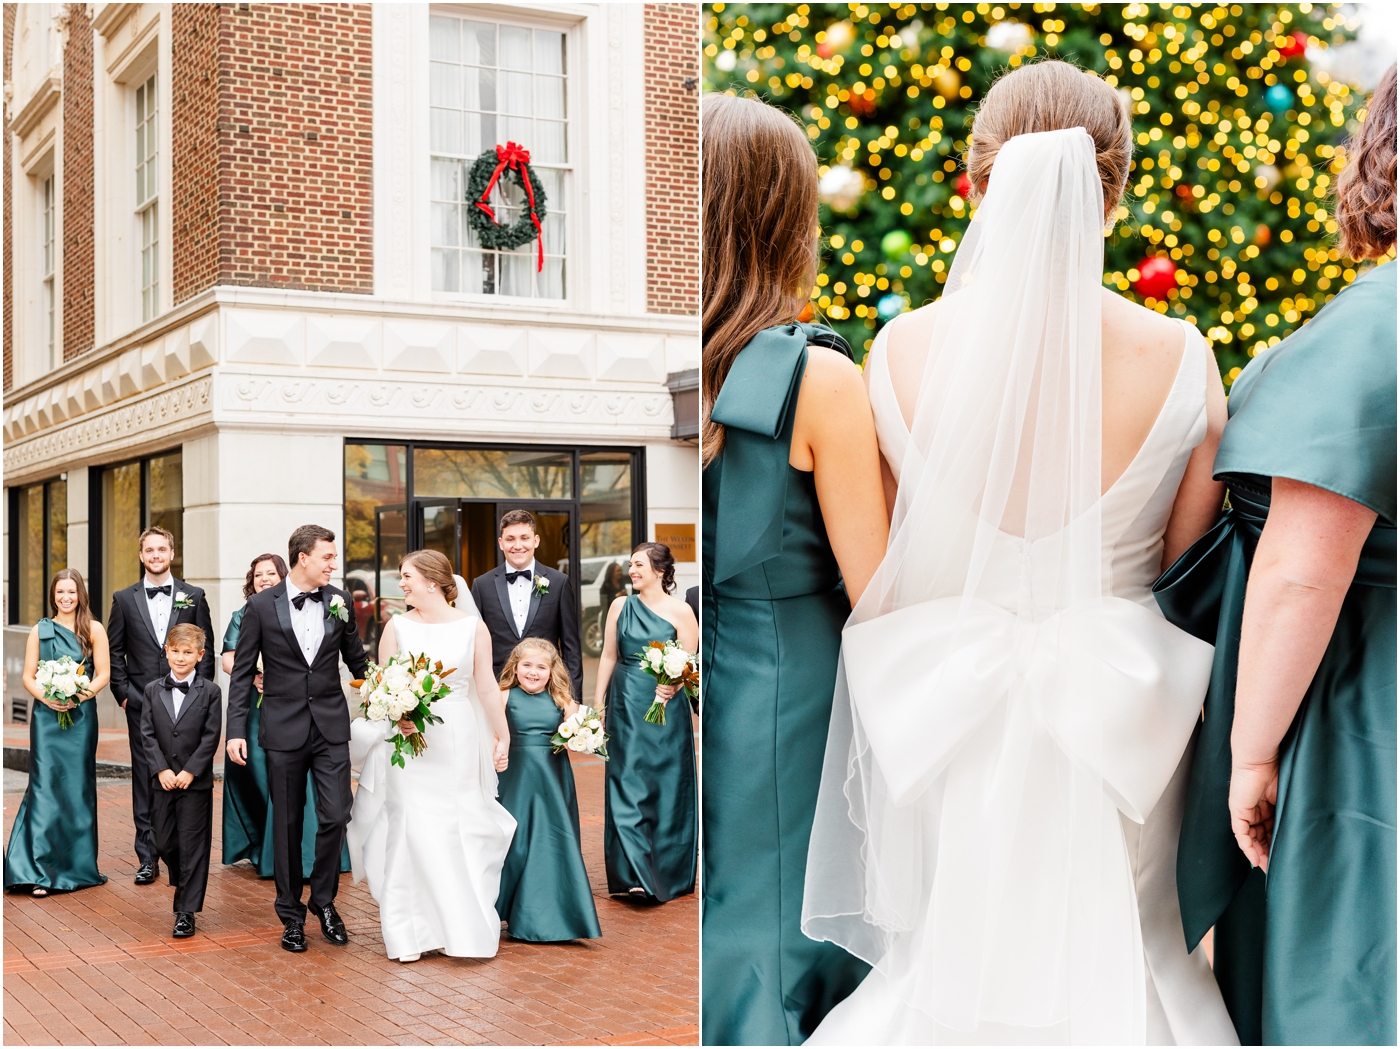 Bride & Groom at their Christmas wedding at the Westin in Downtown Greenville